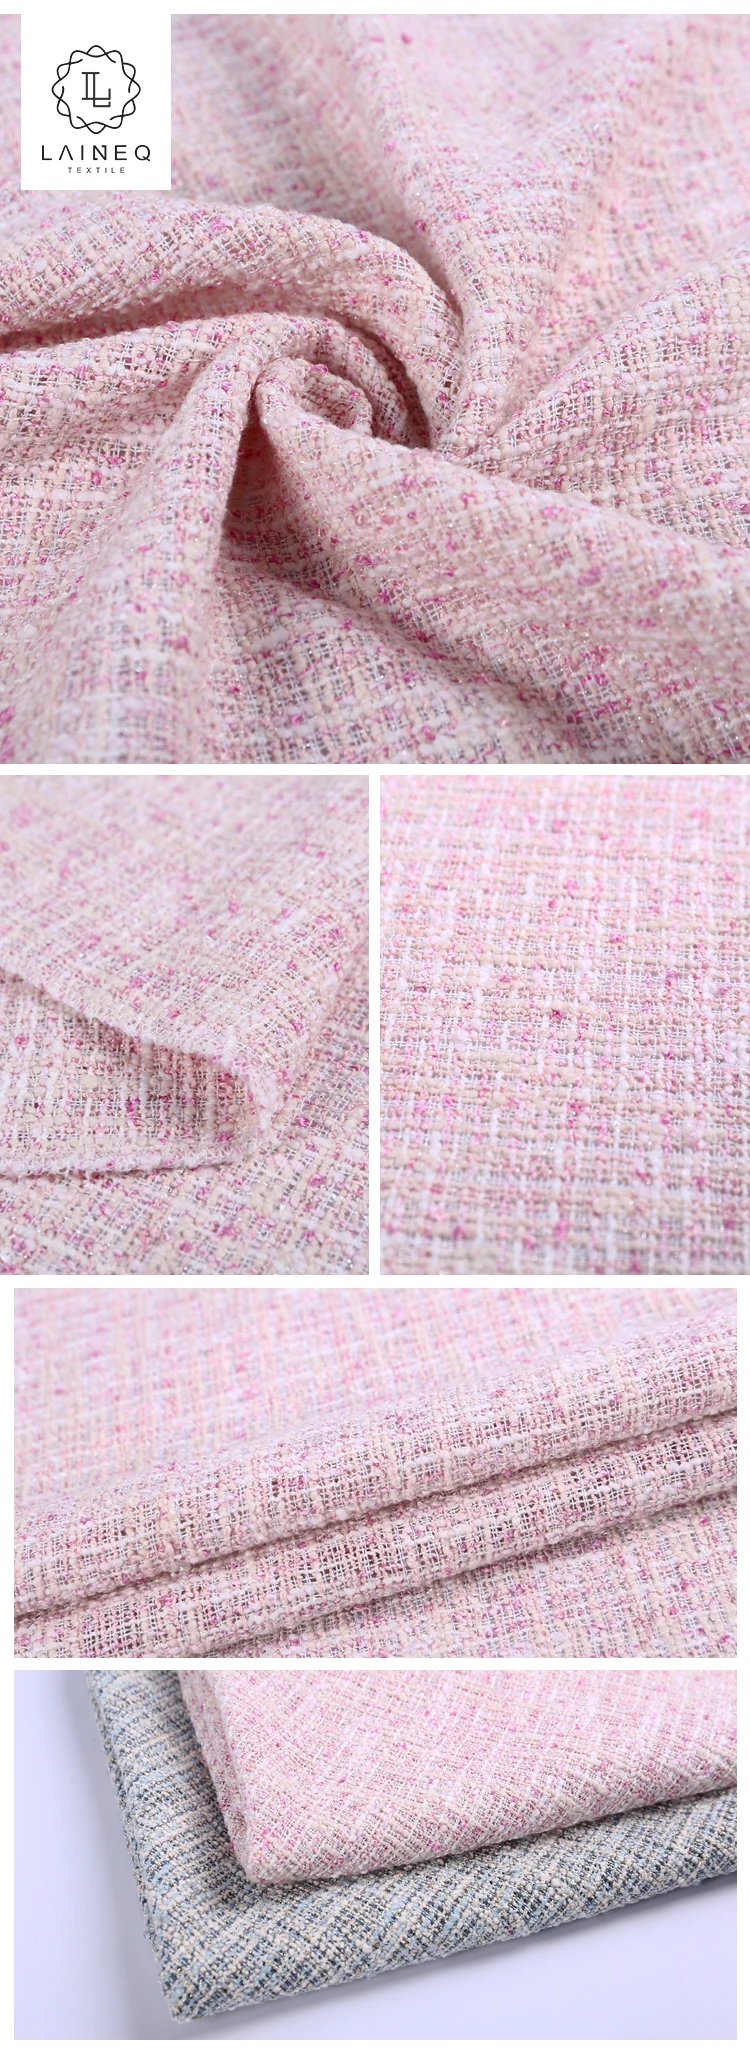 Fabric Cotton Mix Suiting Pink Gallant Boucle Tweed 